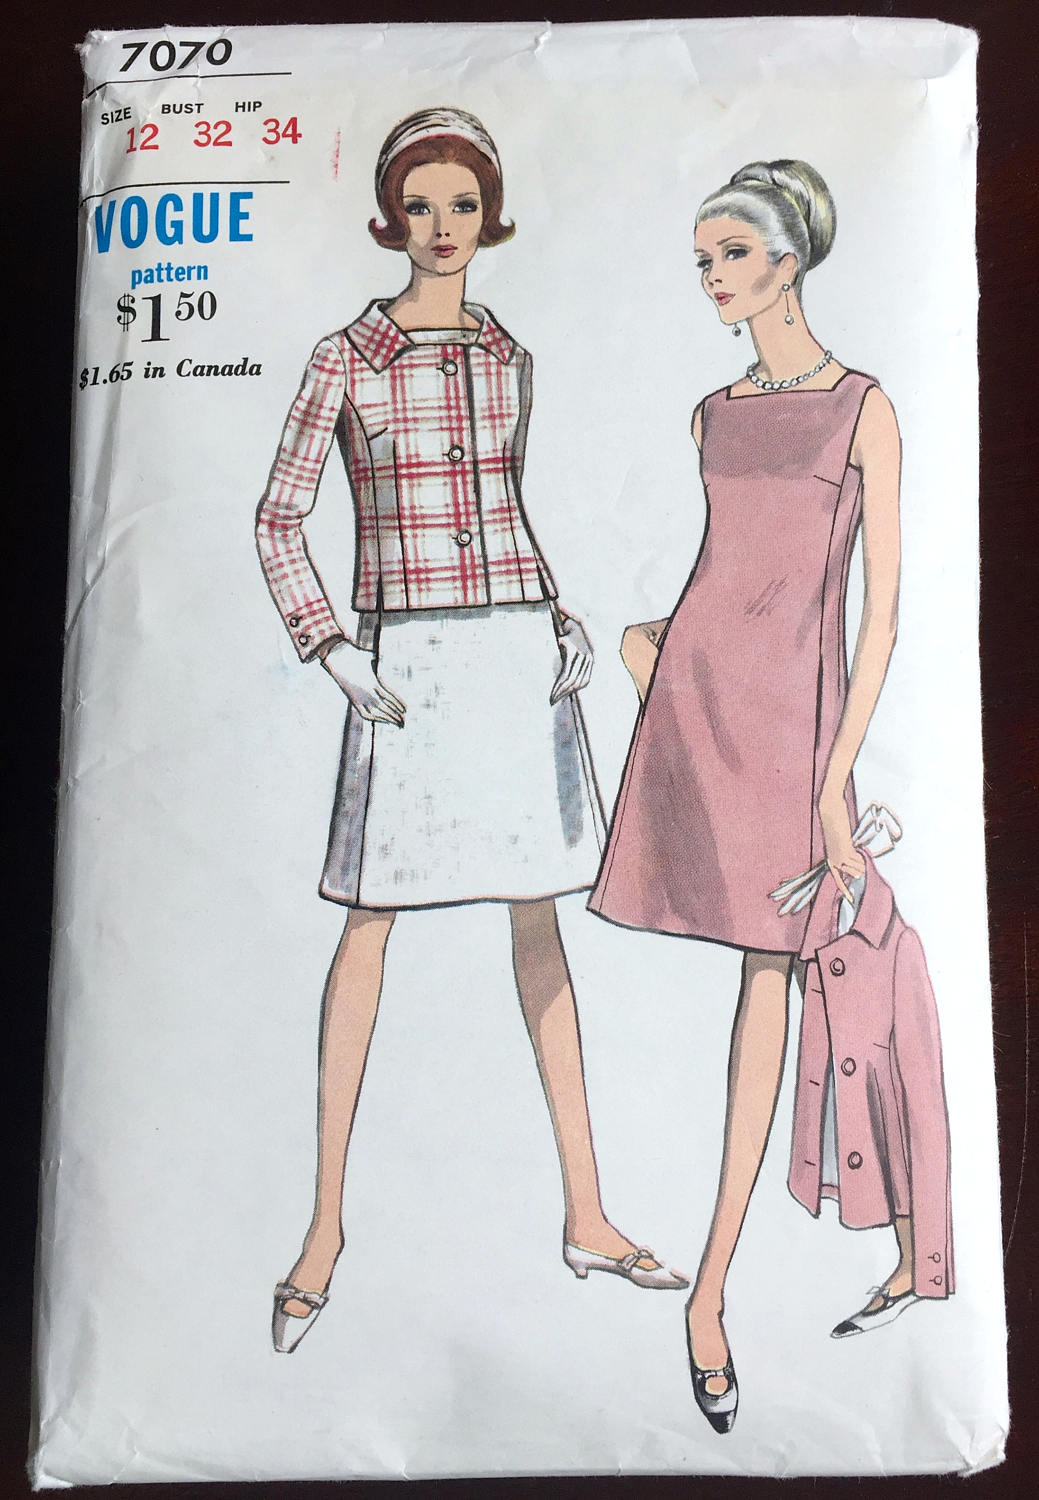 1960's Vogue One-Piece Dress with Jacket Pattern - Bust 32